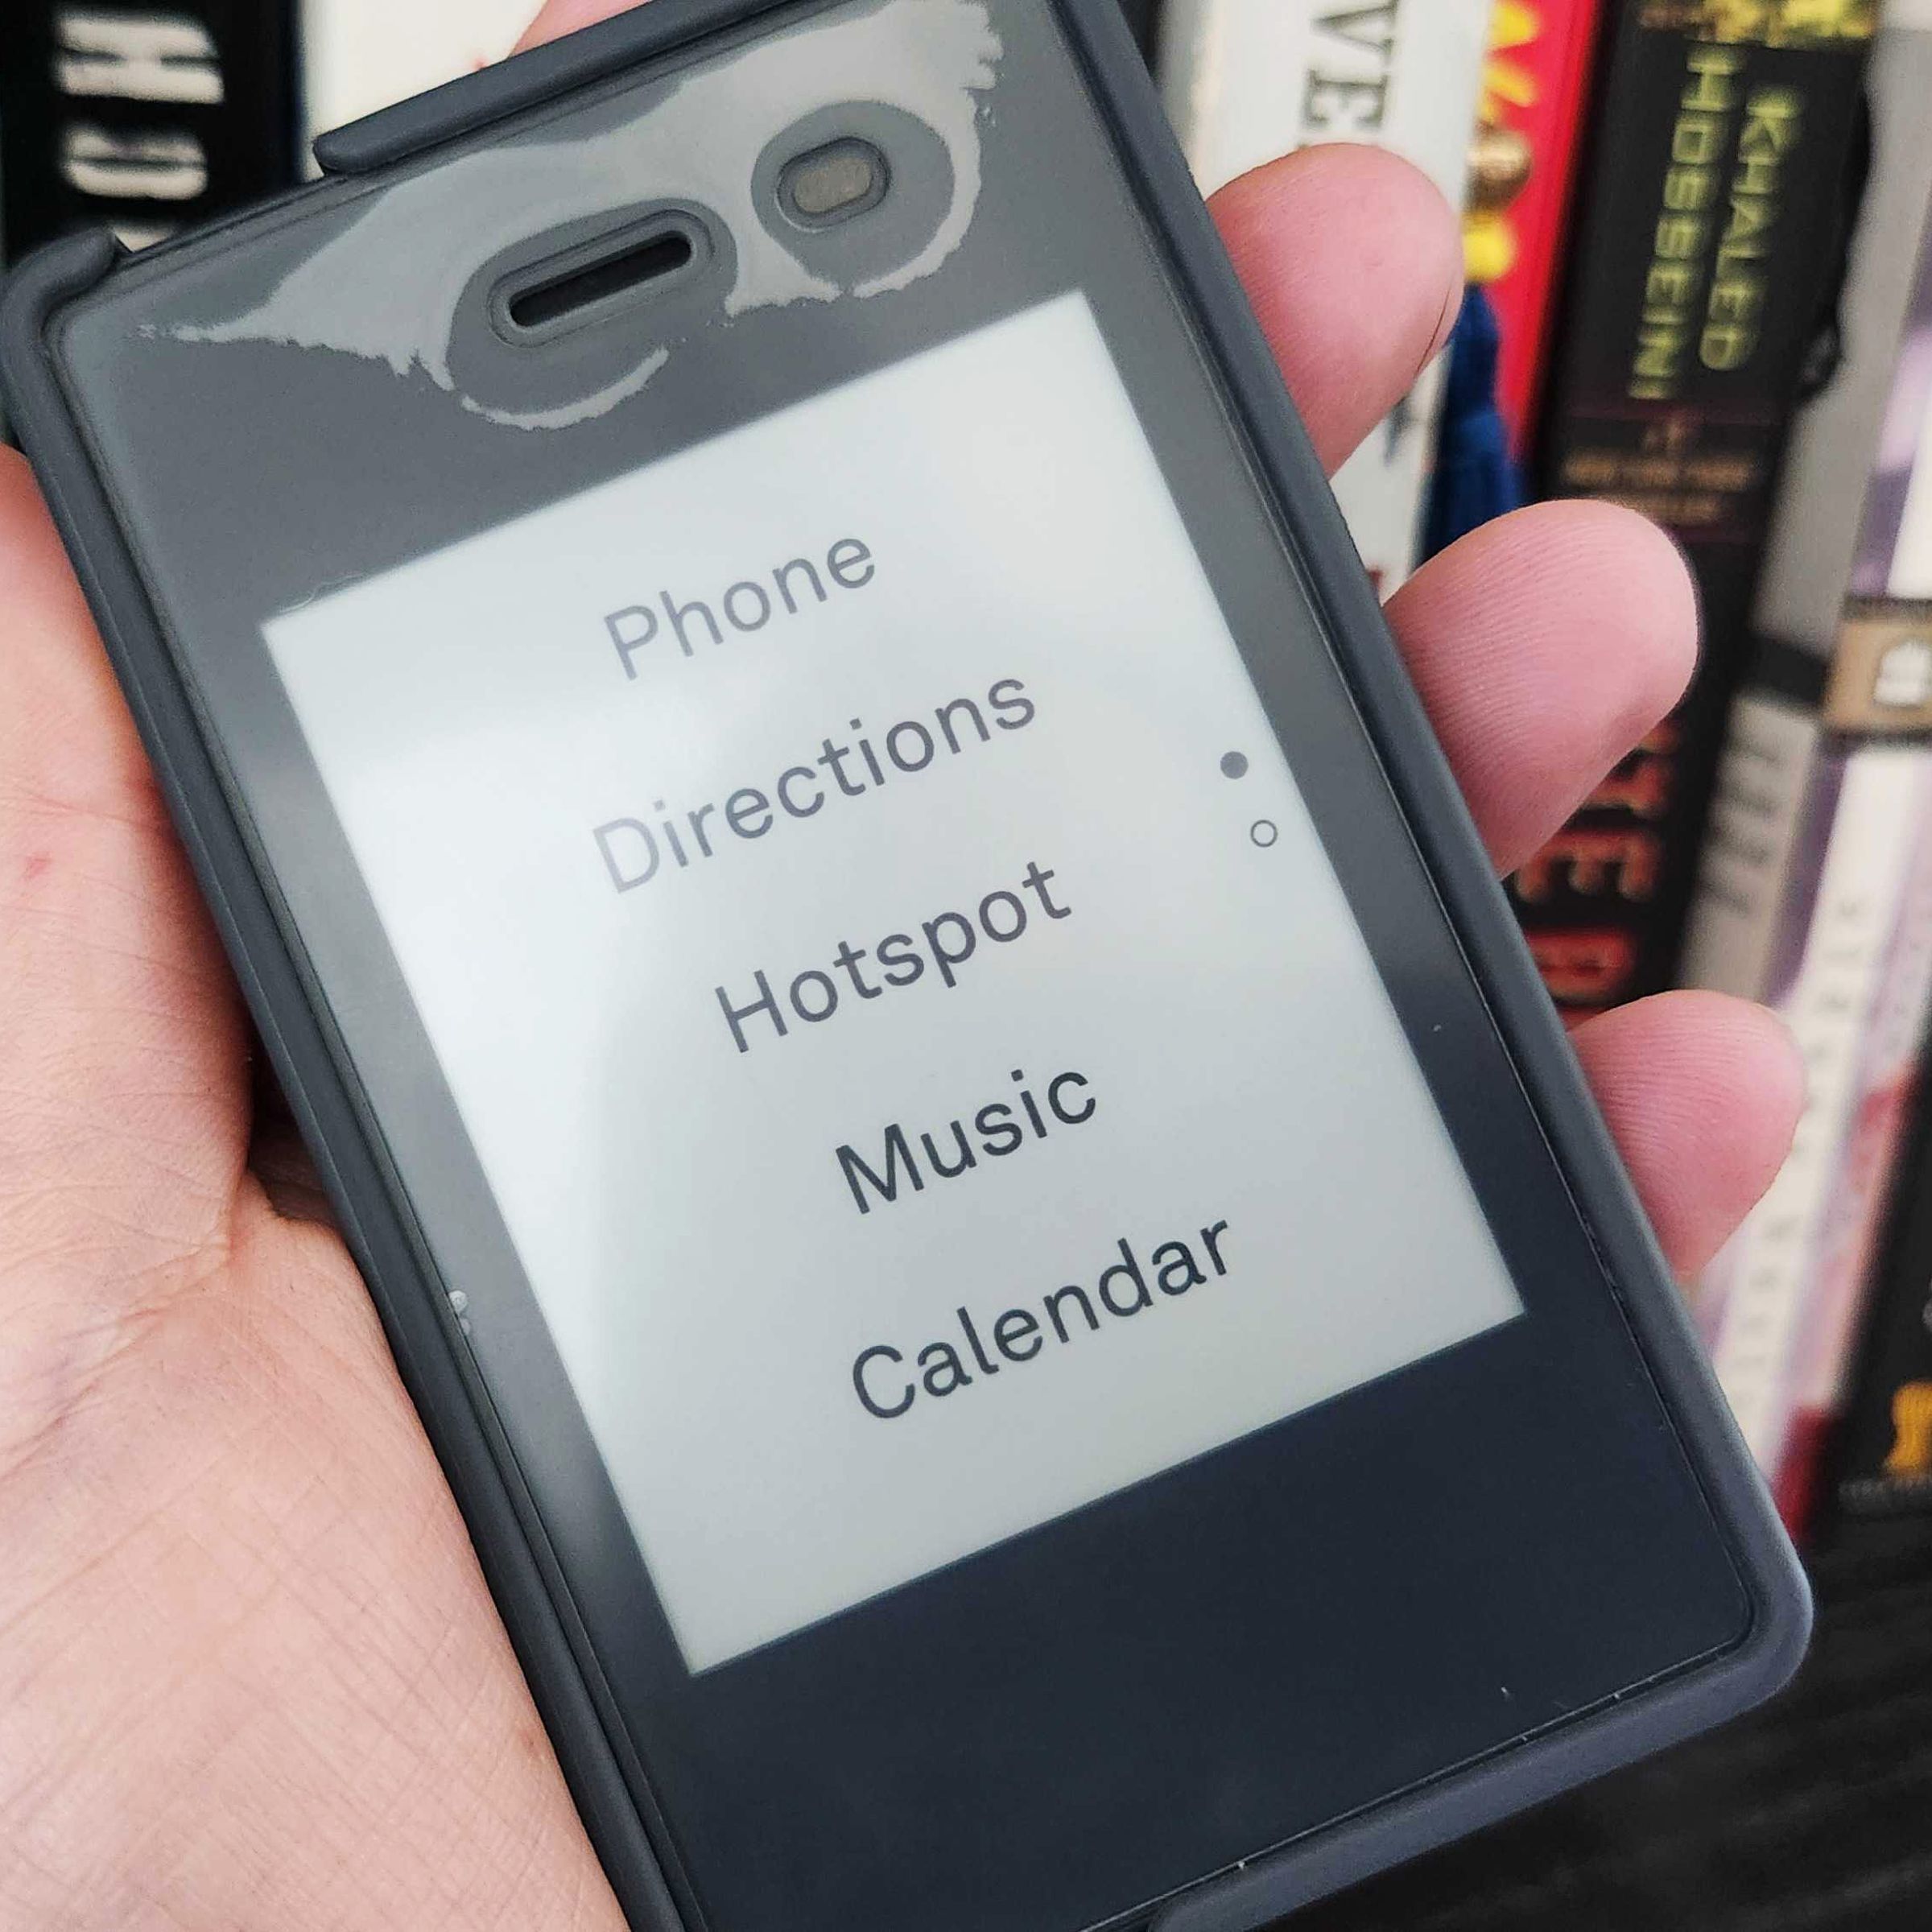 A small cellphone held in a person’s hand with books in the background.